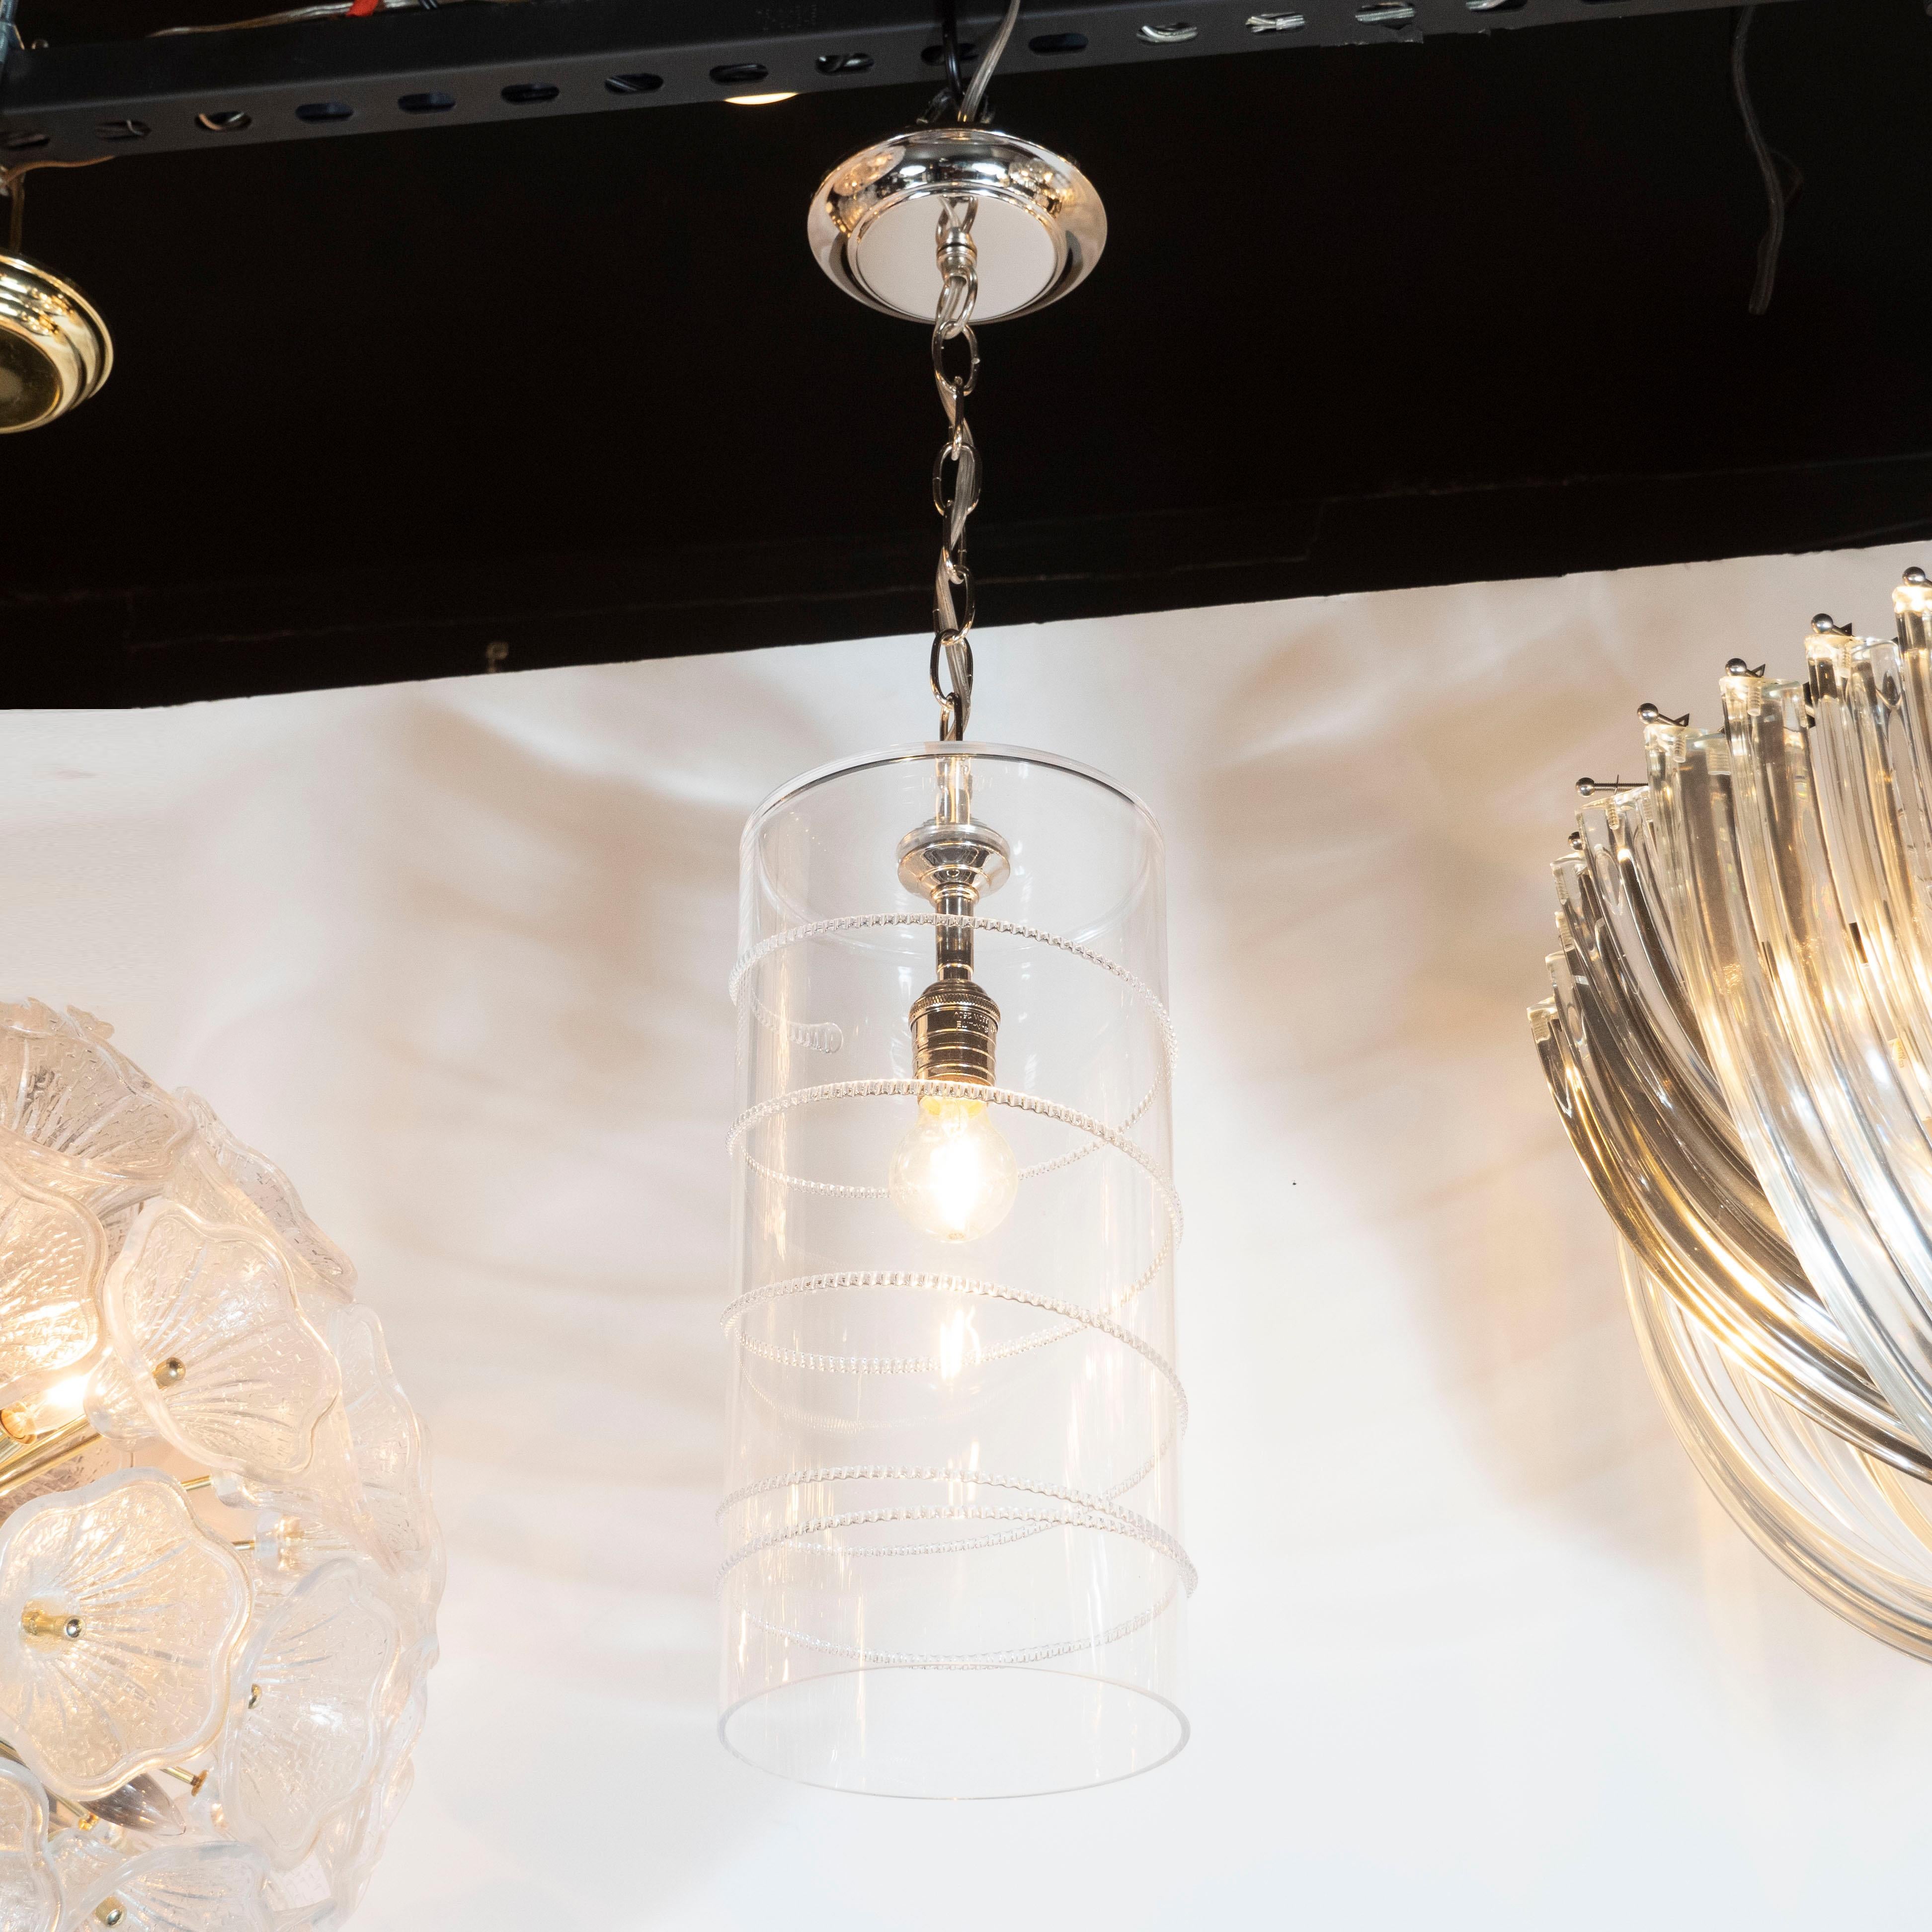 This sophisticated pair of modernist pendants offer a hand blown cylindrical form with a helix form pattern of beaded glass running along the exterior in relief. They attach to the ceiling via a nickel chain and canopy. With their clean modernist